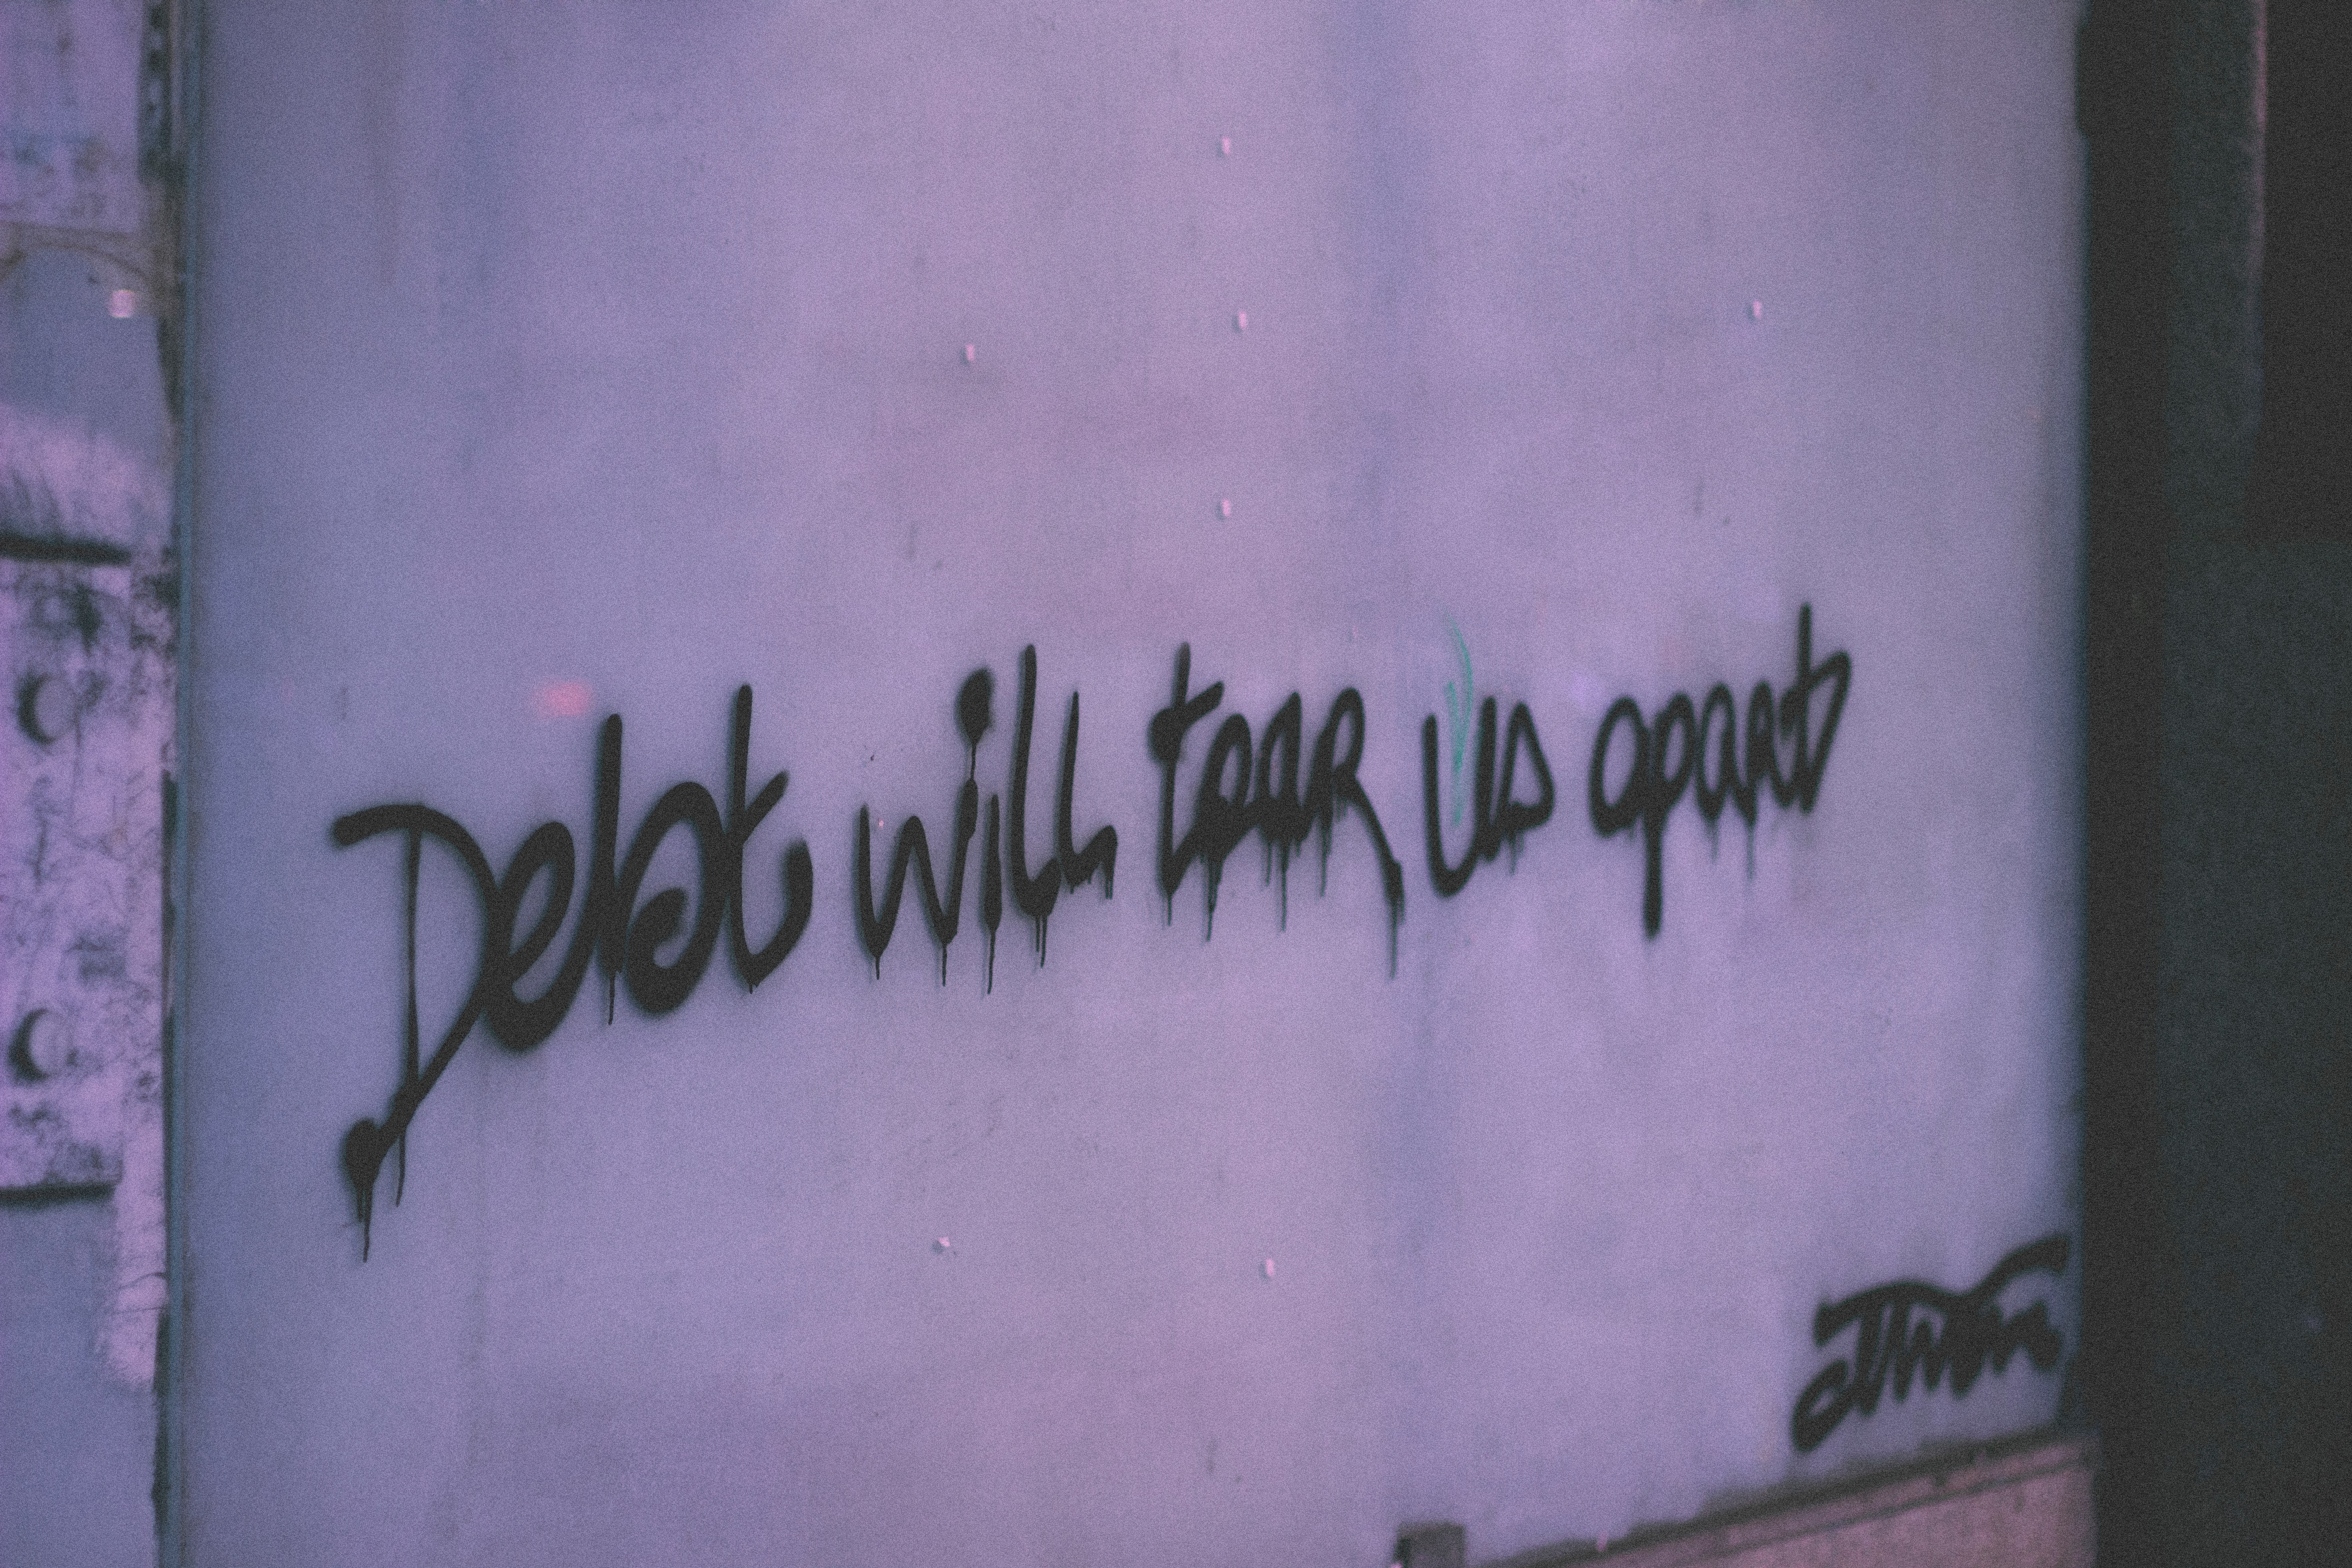 Stock photo of words on wall saying, "Debt will tear us apart."